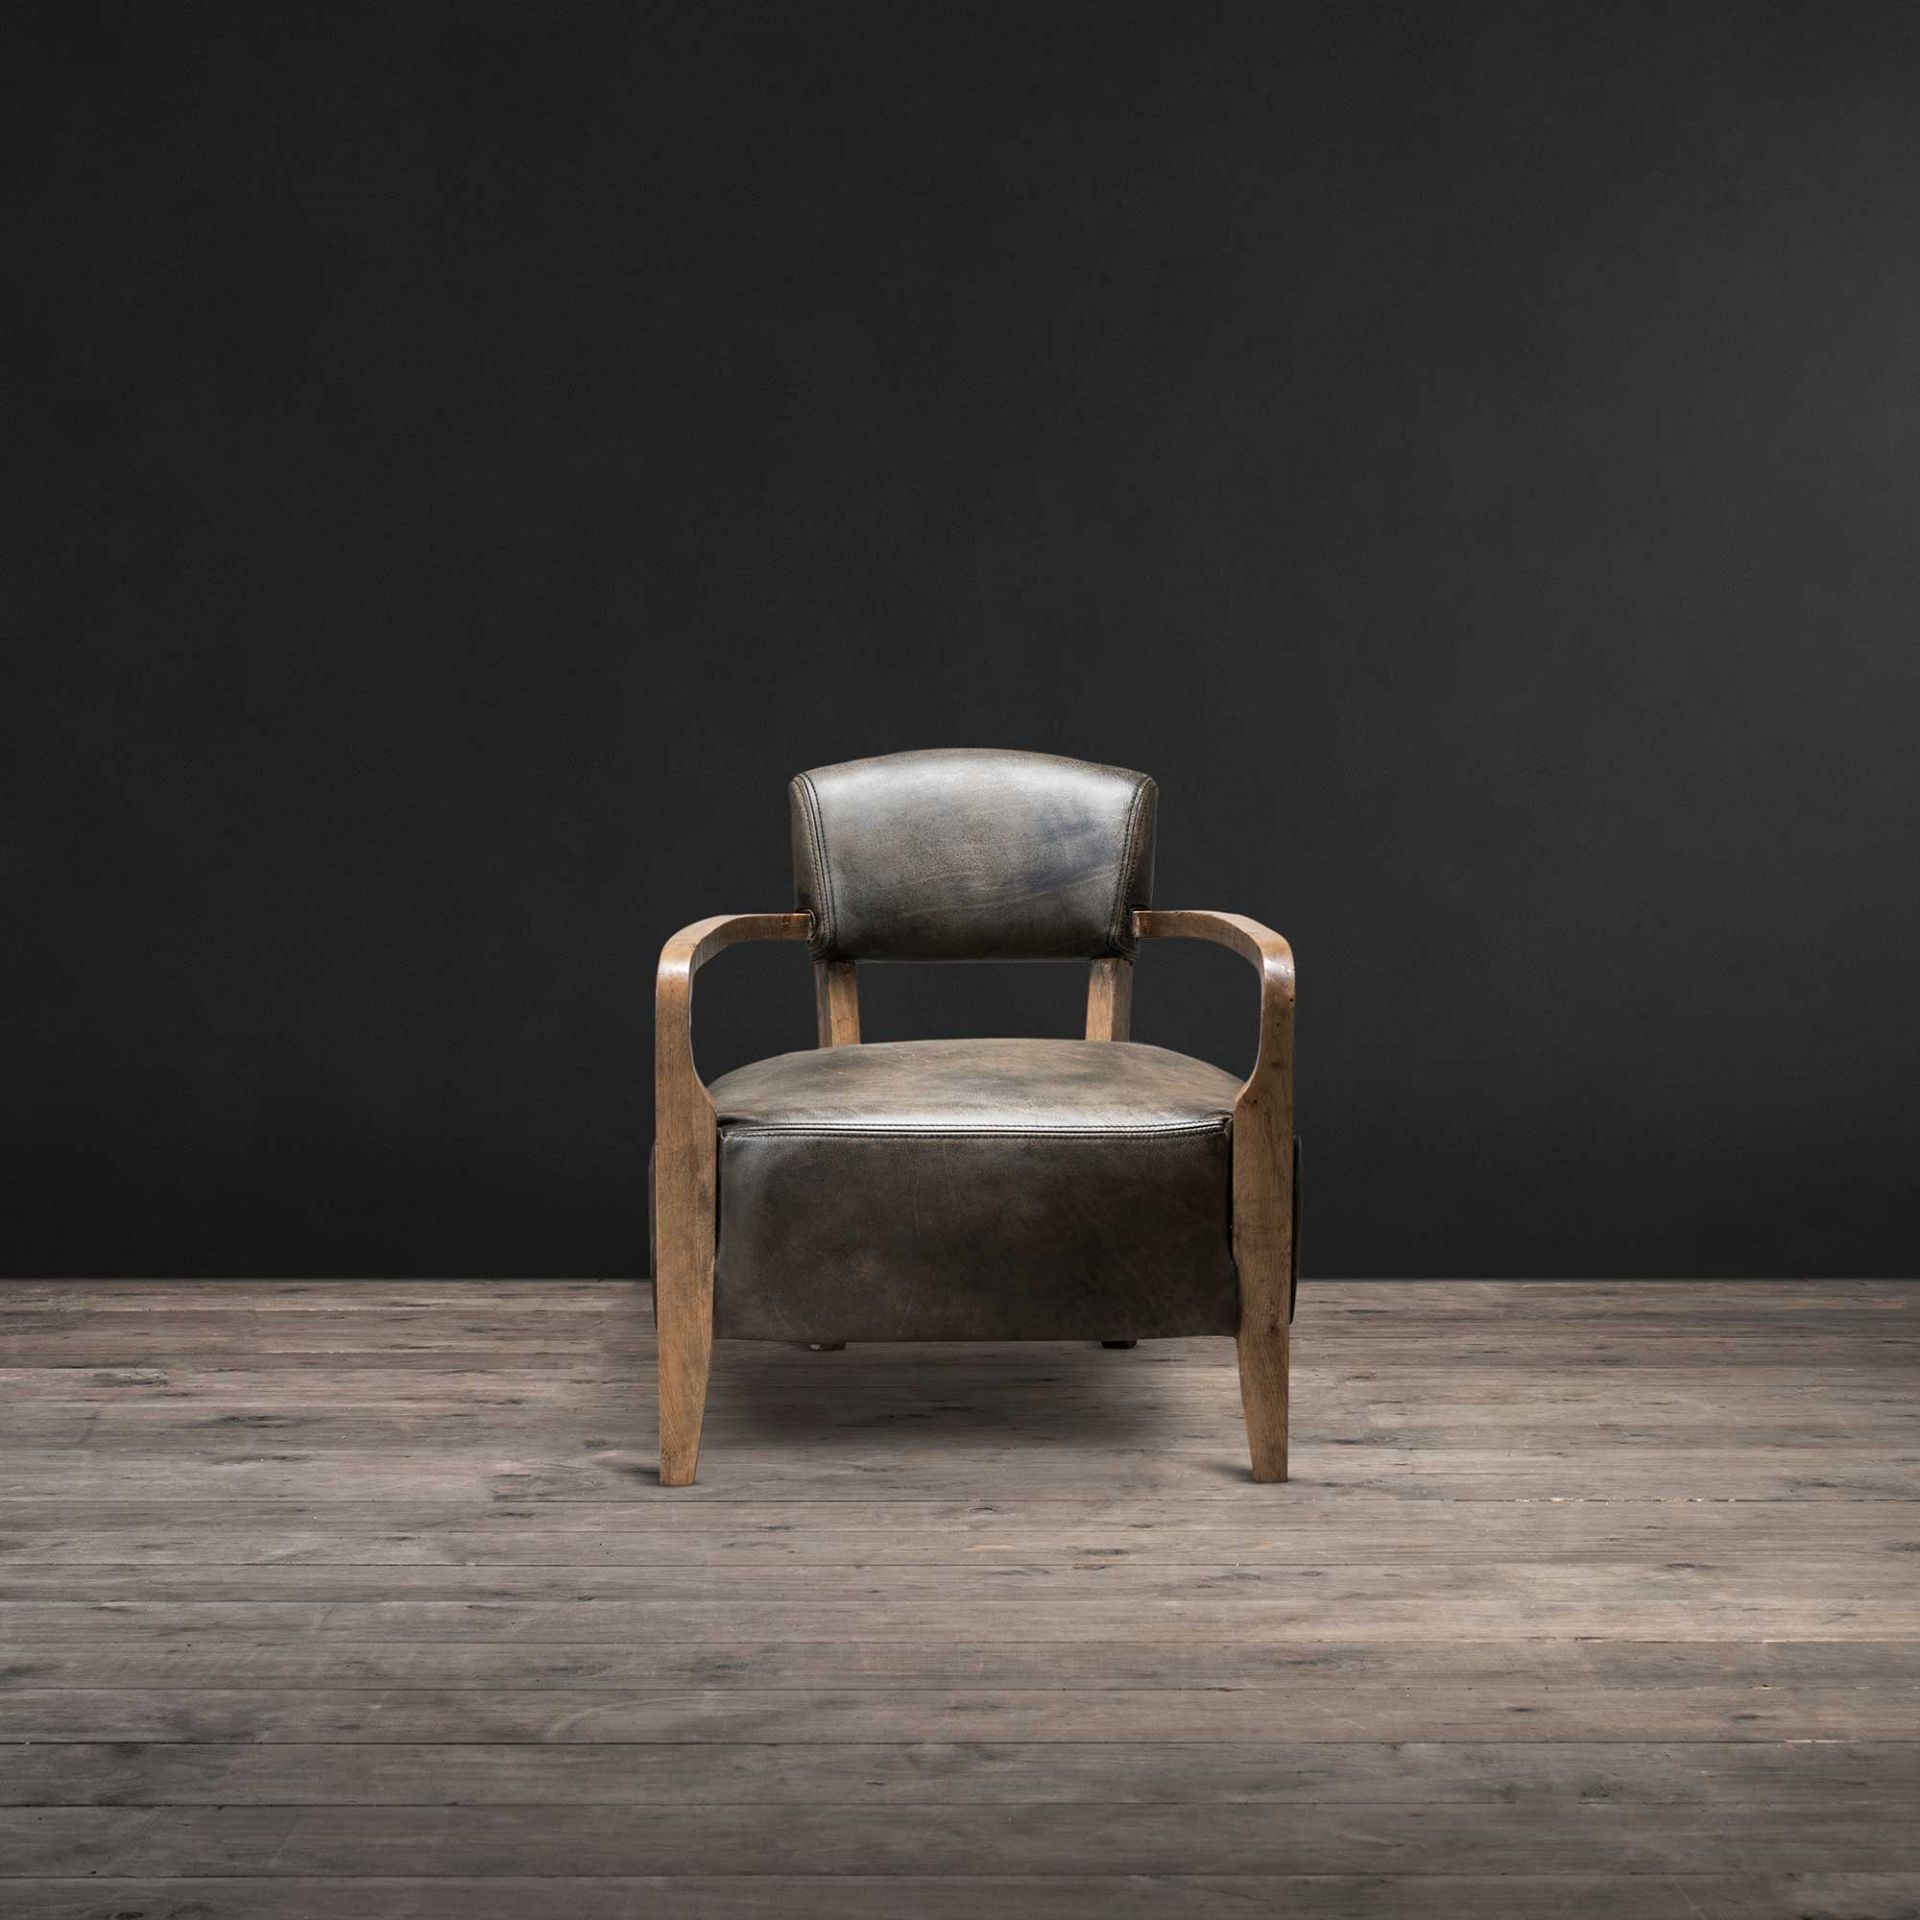 Cabana Chair Vagabond Black Leather And Weathered Oak Inspired By Relaxed Outdoor Lounging, The - Image 2 of 2